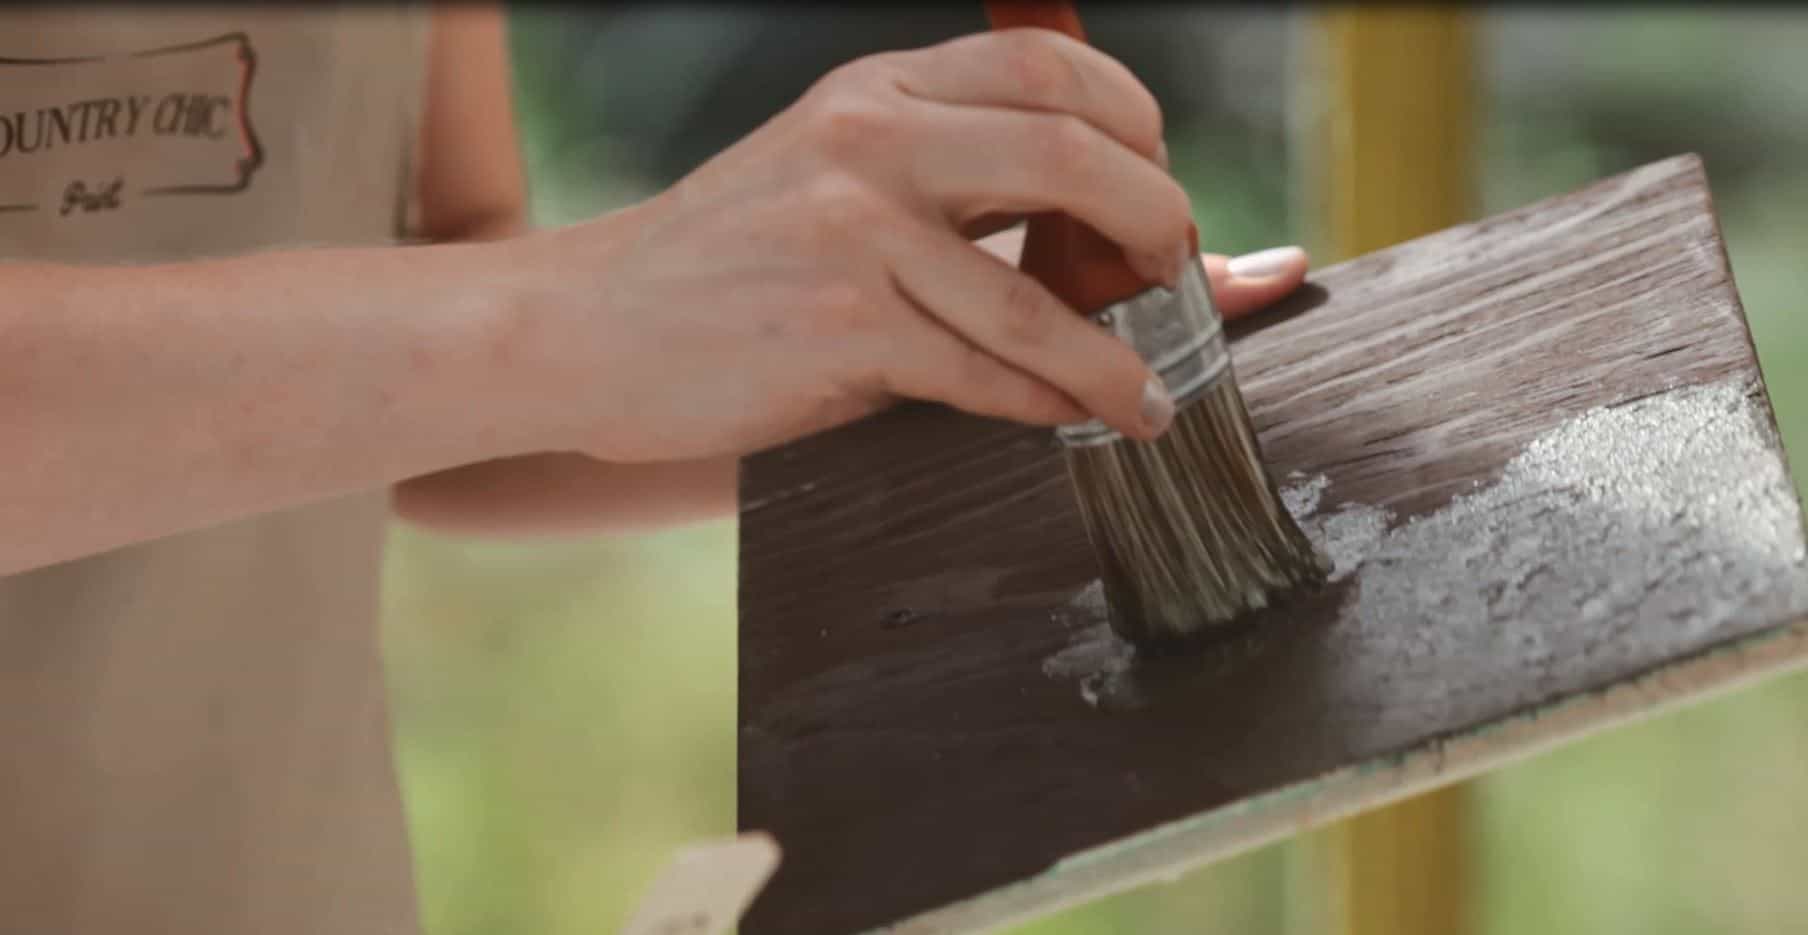 How To Create a Faux Oxidized Copper Finish with Country Chic Paint #DIY #furniturepaint #paintedfurniture #homedecor #howto #tutorial #video #techniques #oxidizedcopper #copper #fauxfinish #metallic - blog.countrychicpaint.com